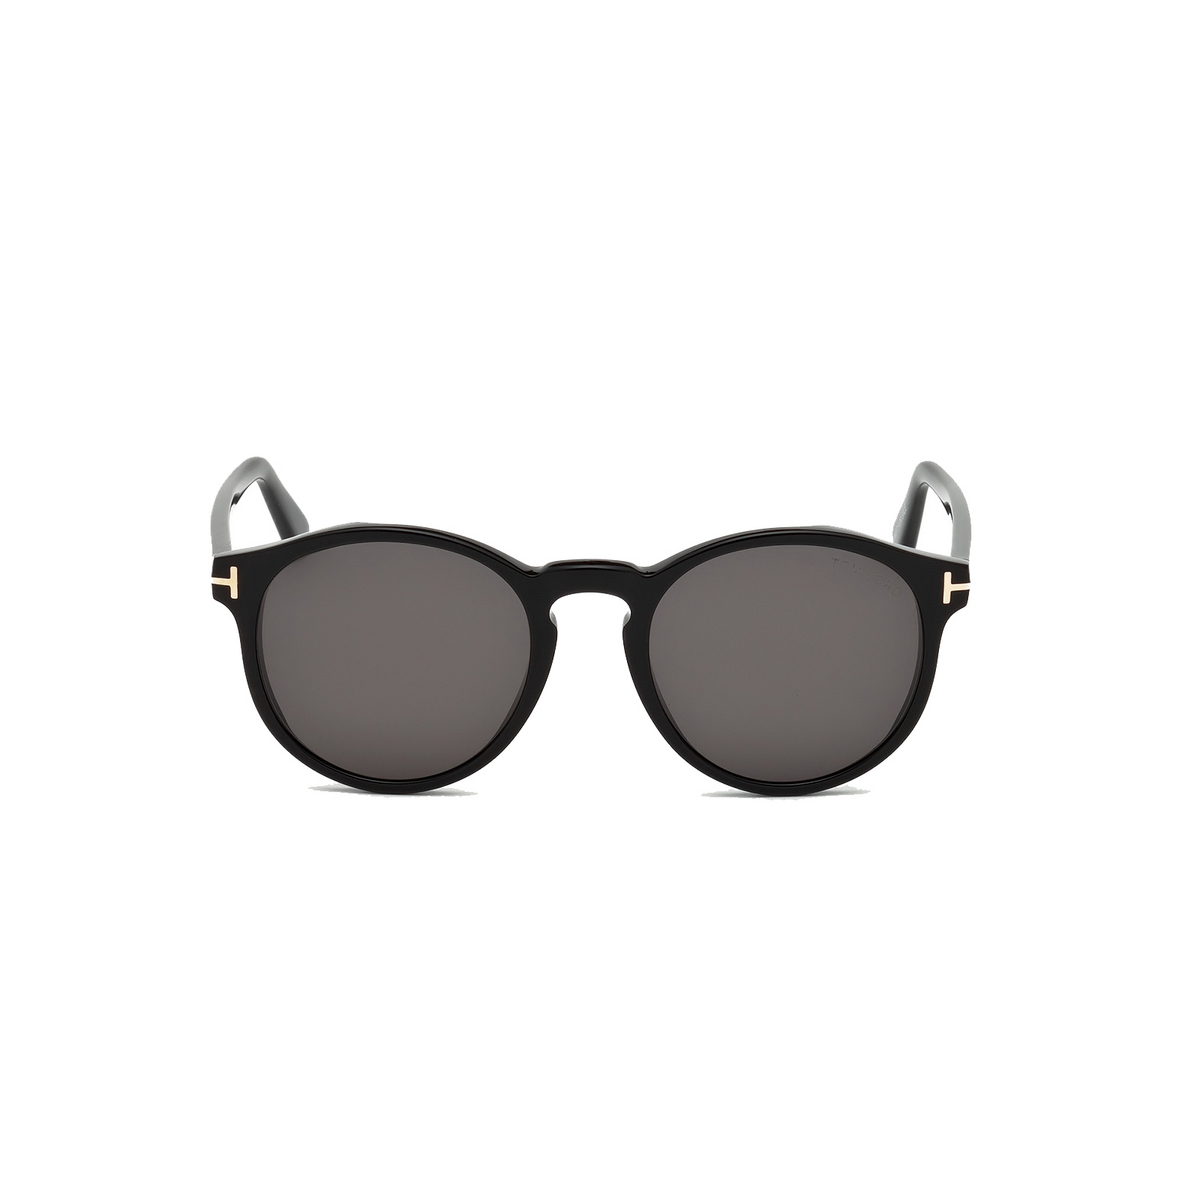 Tom Ford IAN-02 Sunglasses 01A Black - front view